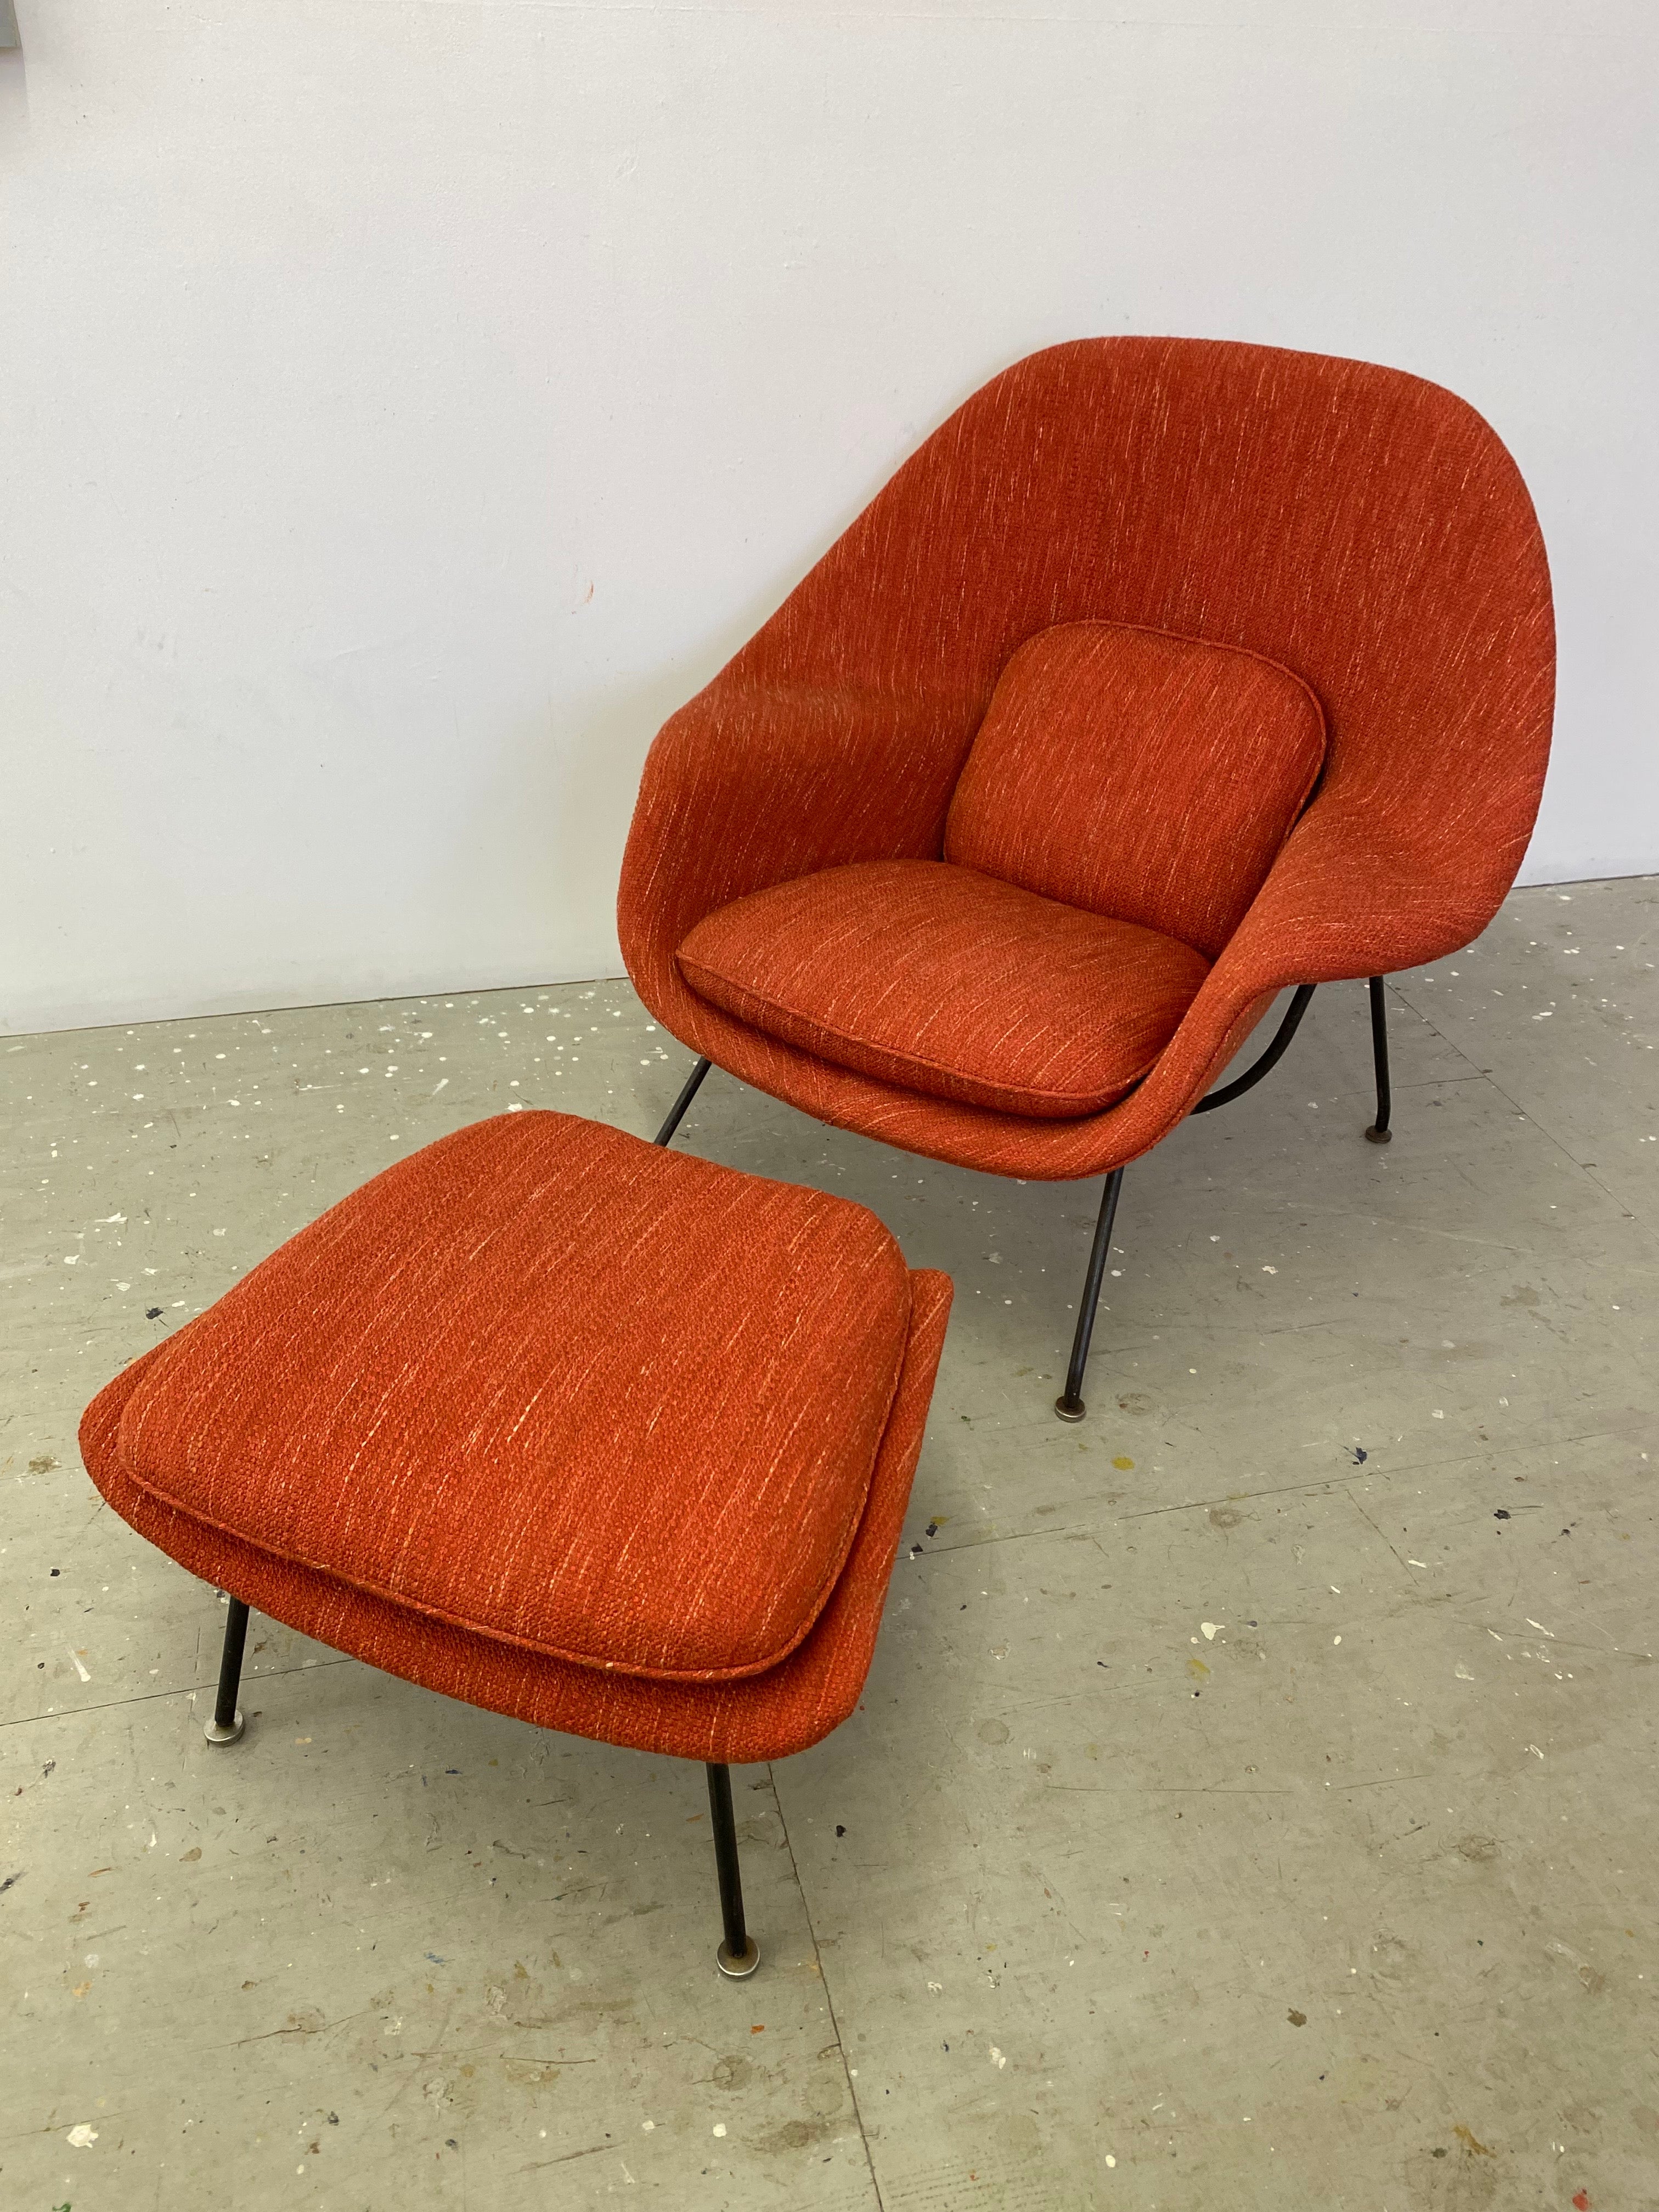 Eero Saarinen for Knoll Womb Chair and ottoman.  Probably one of the most comfortable chairs ever created!  This chair and ottoman dates to the mid-60's, although the design is from 1948.  Old models are made with a fiberglass body, where as the